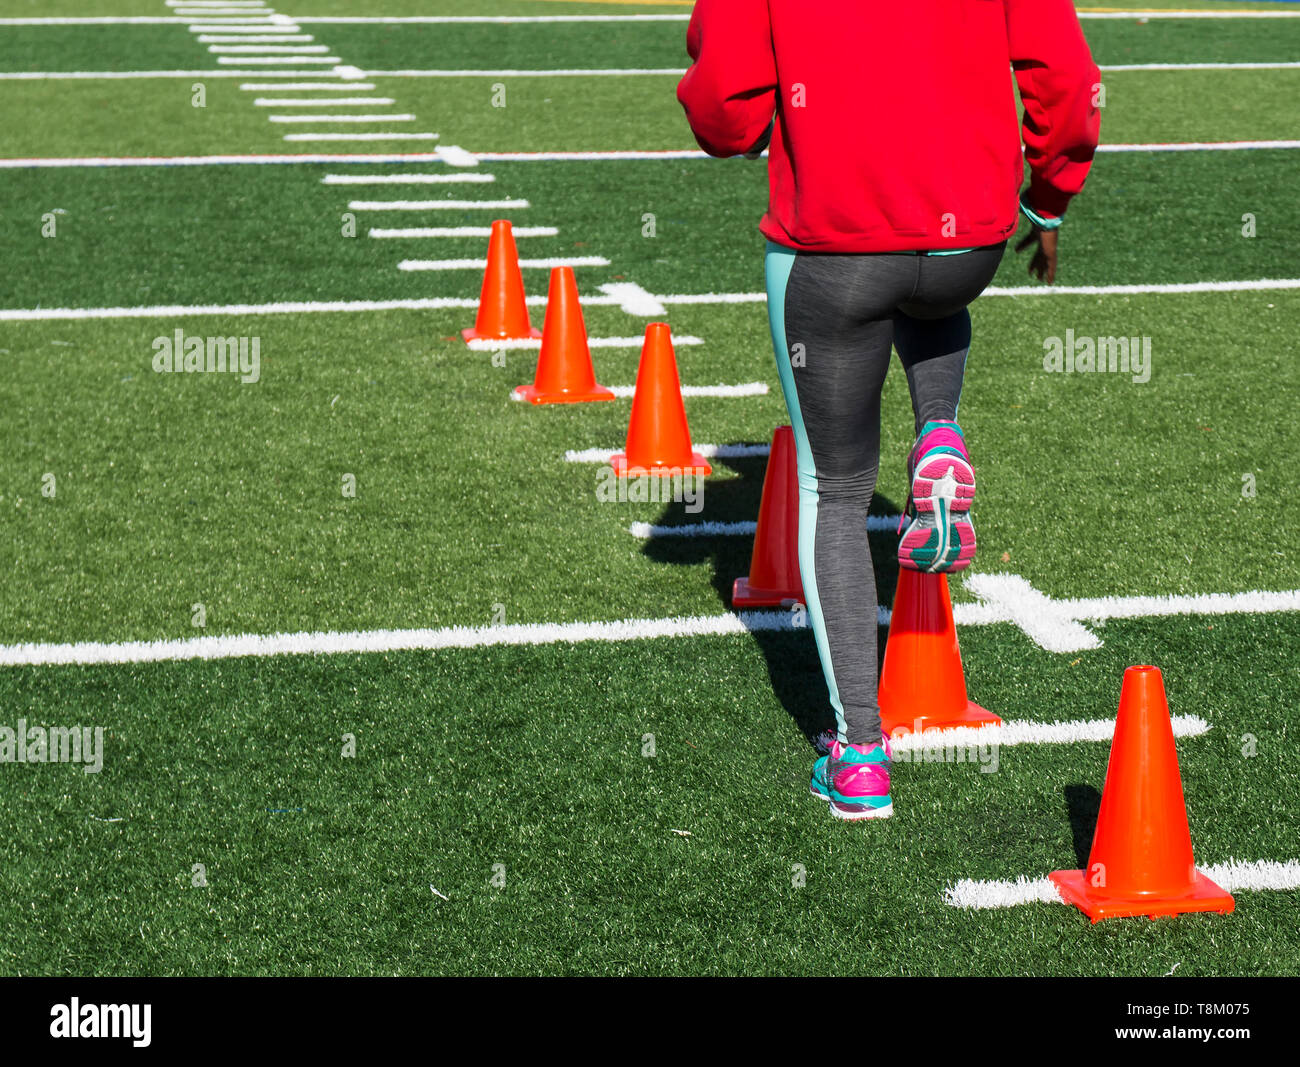 A high school female athlete performs running drills over orange cones on a green turf field on a bright sunny fall afternoon wearing gray spandex. Stock Photo